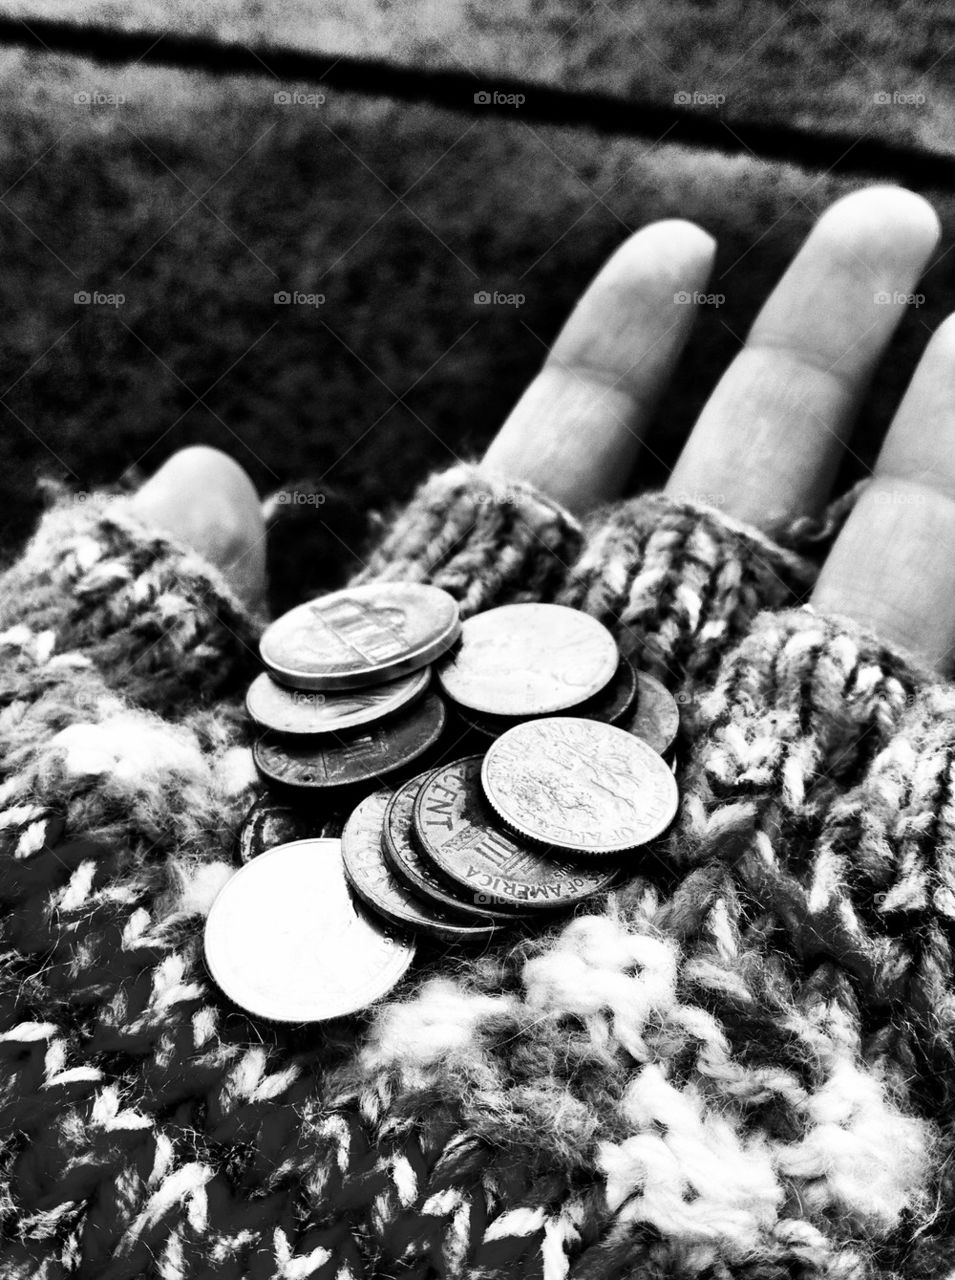 cold fingers glove coins by mjcordova